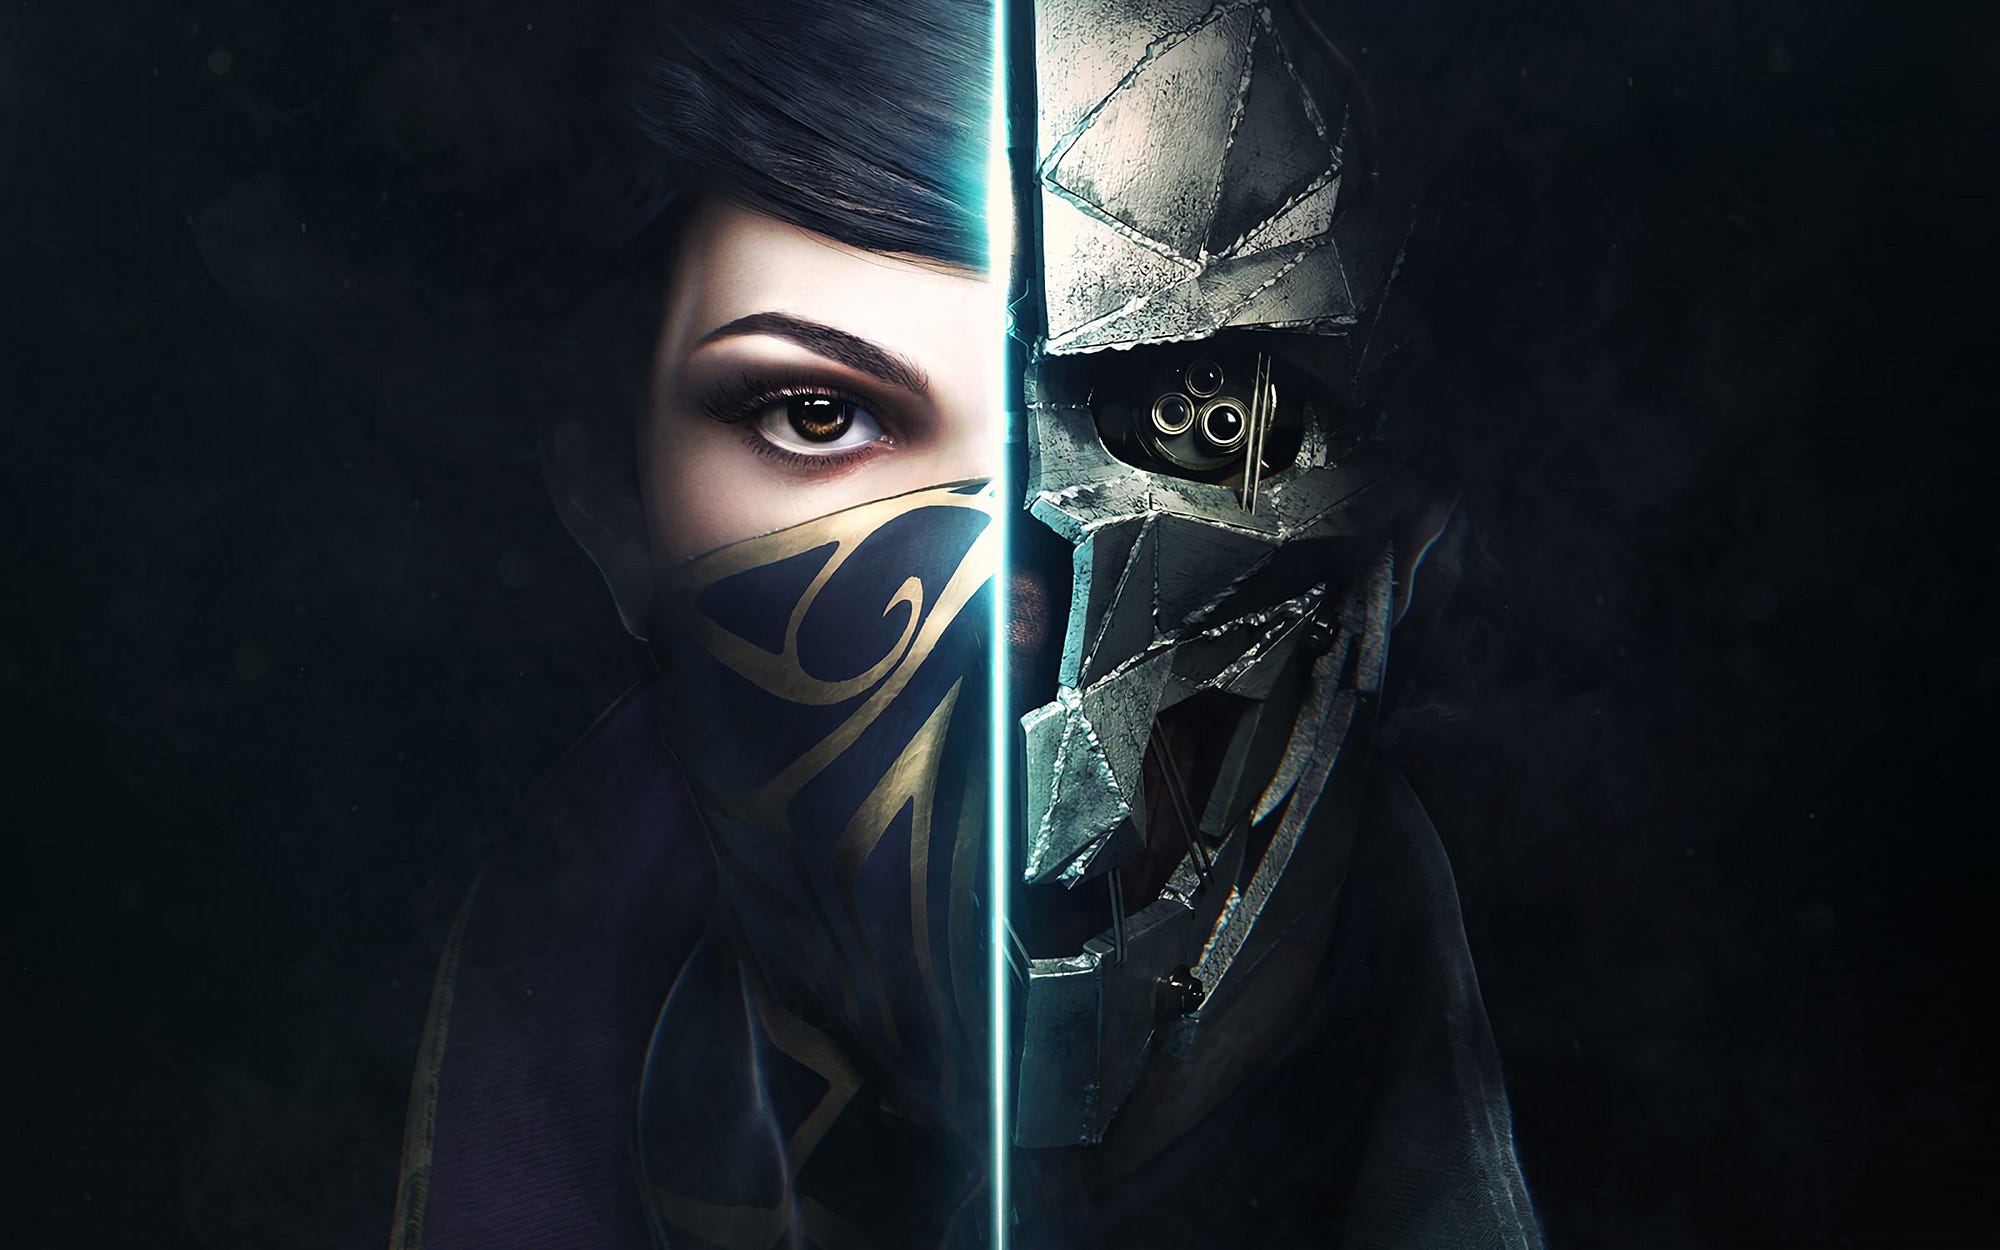 Dishonored 2' Review: A Disappointing Sequel